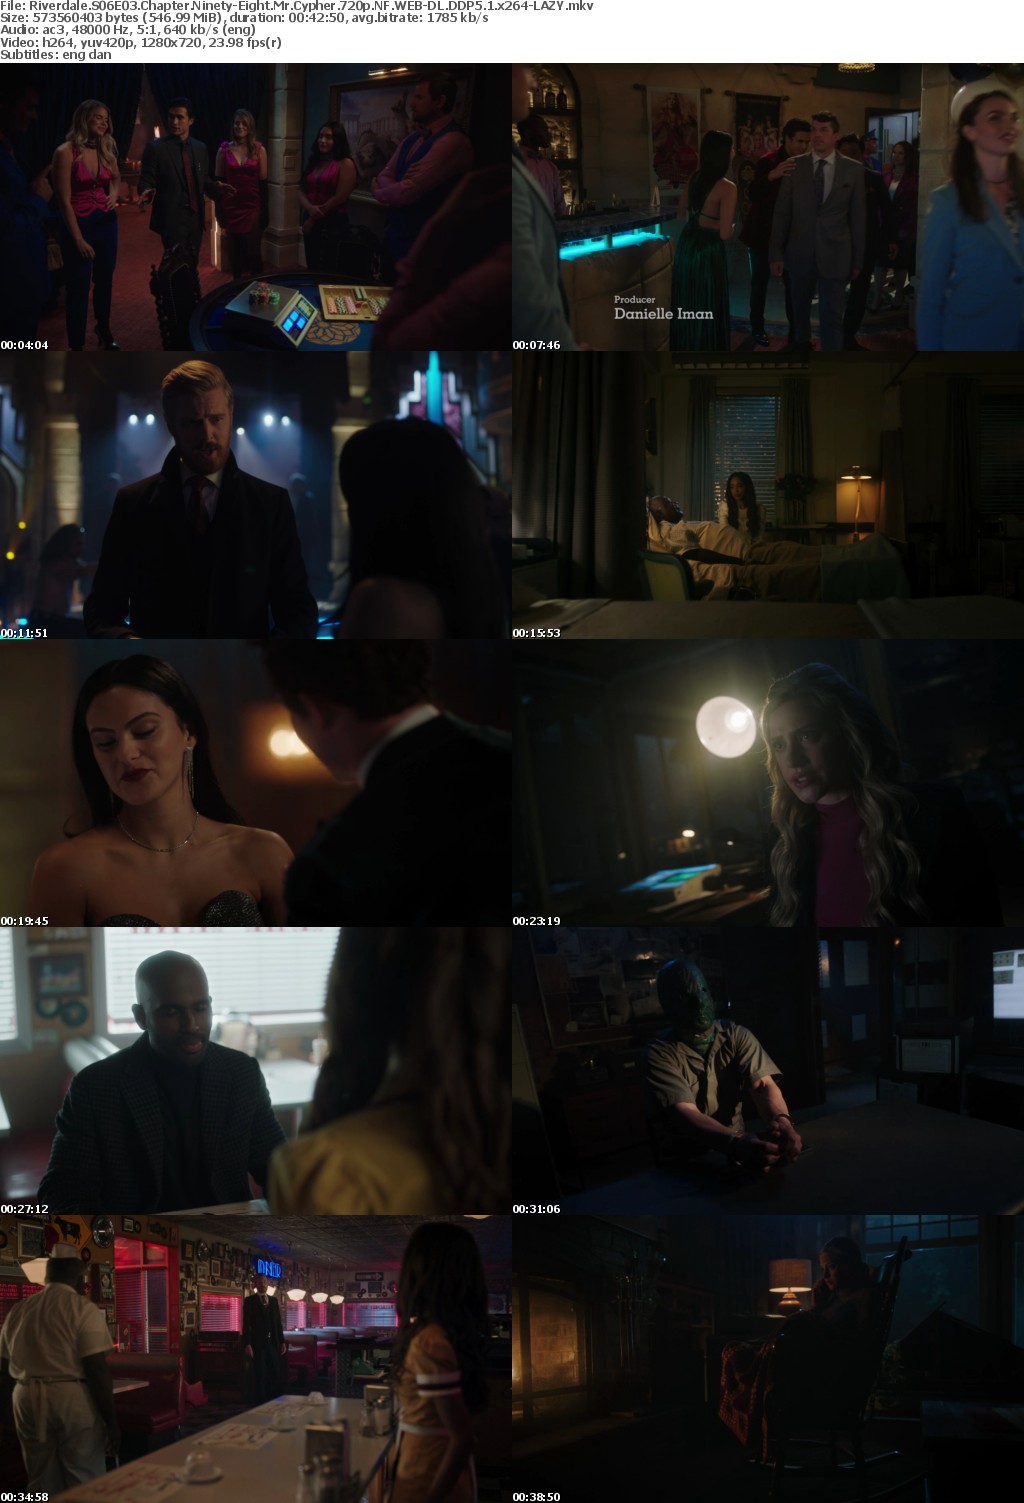 Riverdale US S06E03 Chapter Ninety-Eight Mr Cypher 720p NF WEBRip DDP5 1 x264-LAZY